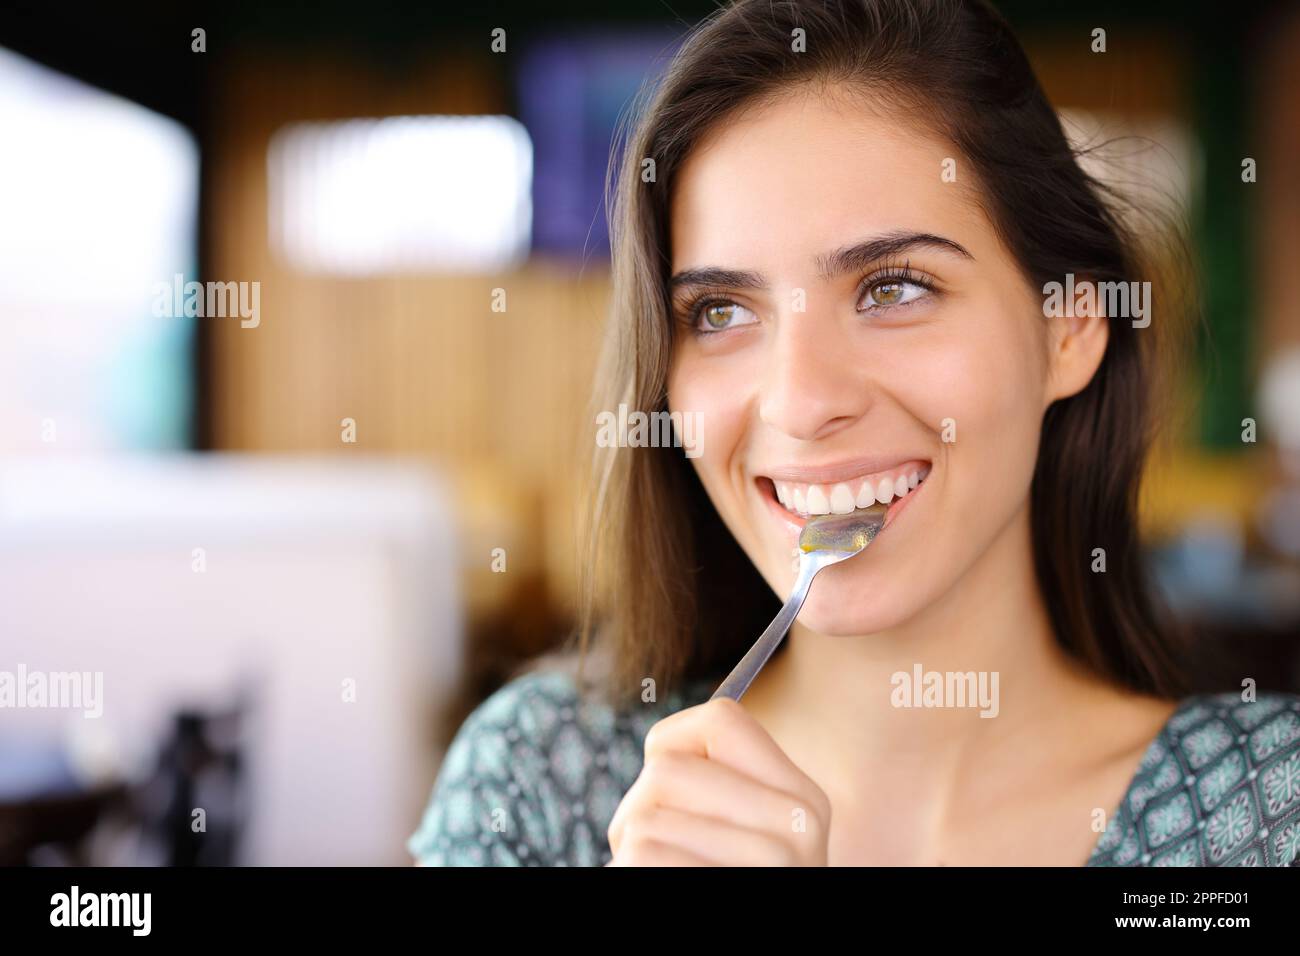 Happy woman with spoon in mouth looks away in a restaurant Stock Photo